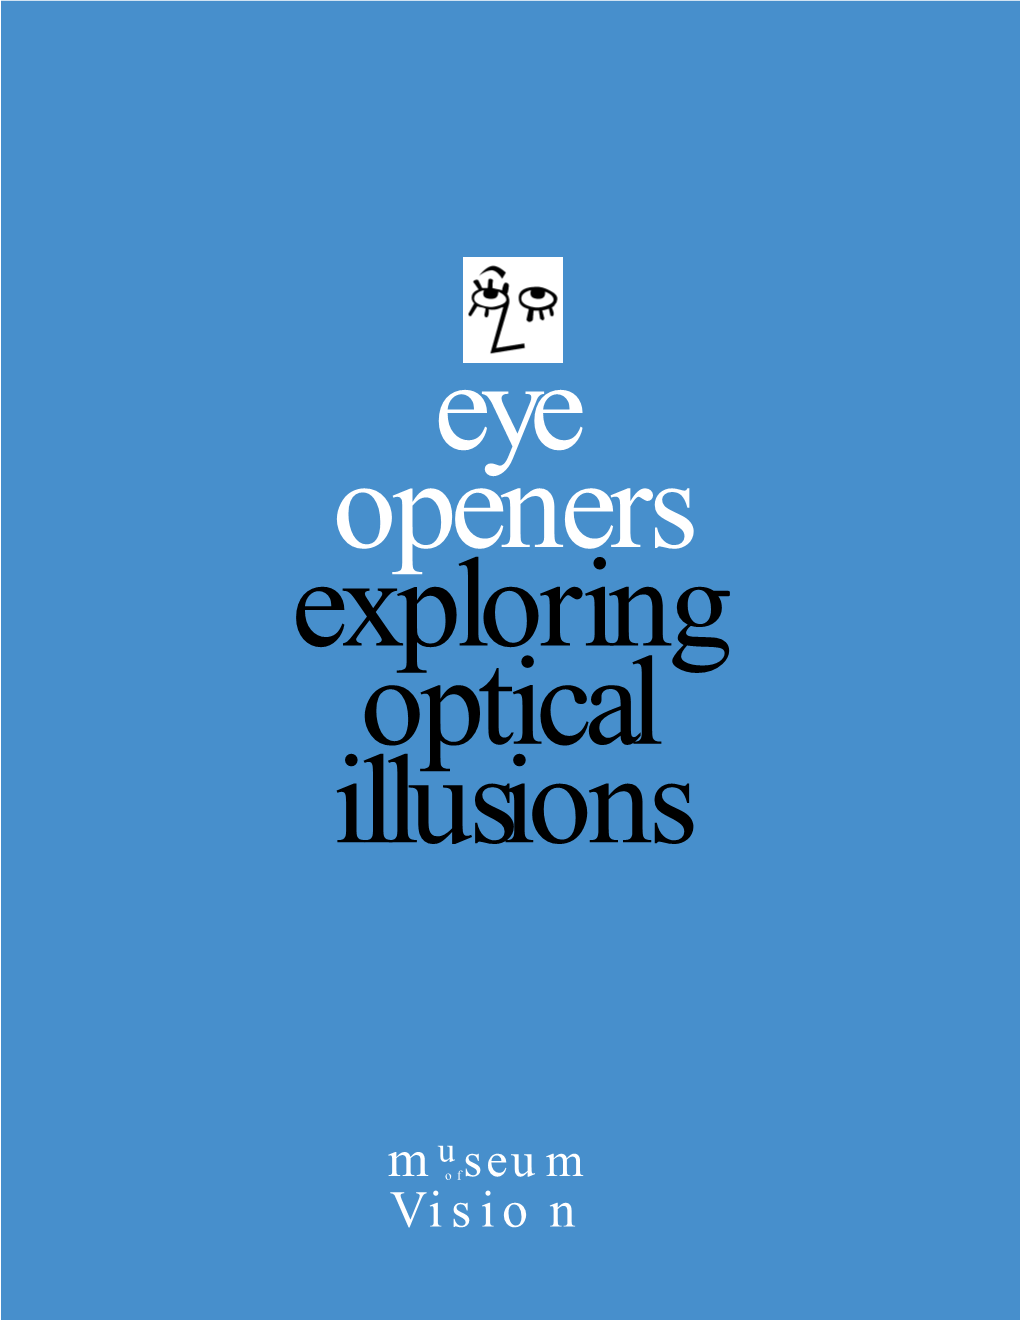 Eye Openers: Exploring Optical Illusions Provides an Enjoyable Learning Experience and Stimulates Interest in the Science of Vision